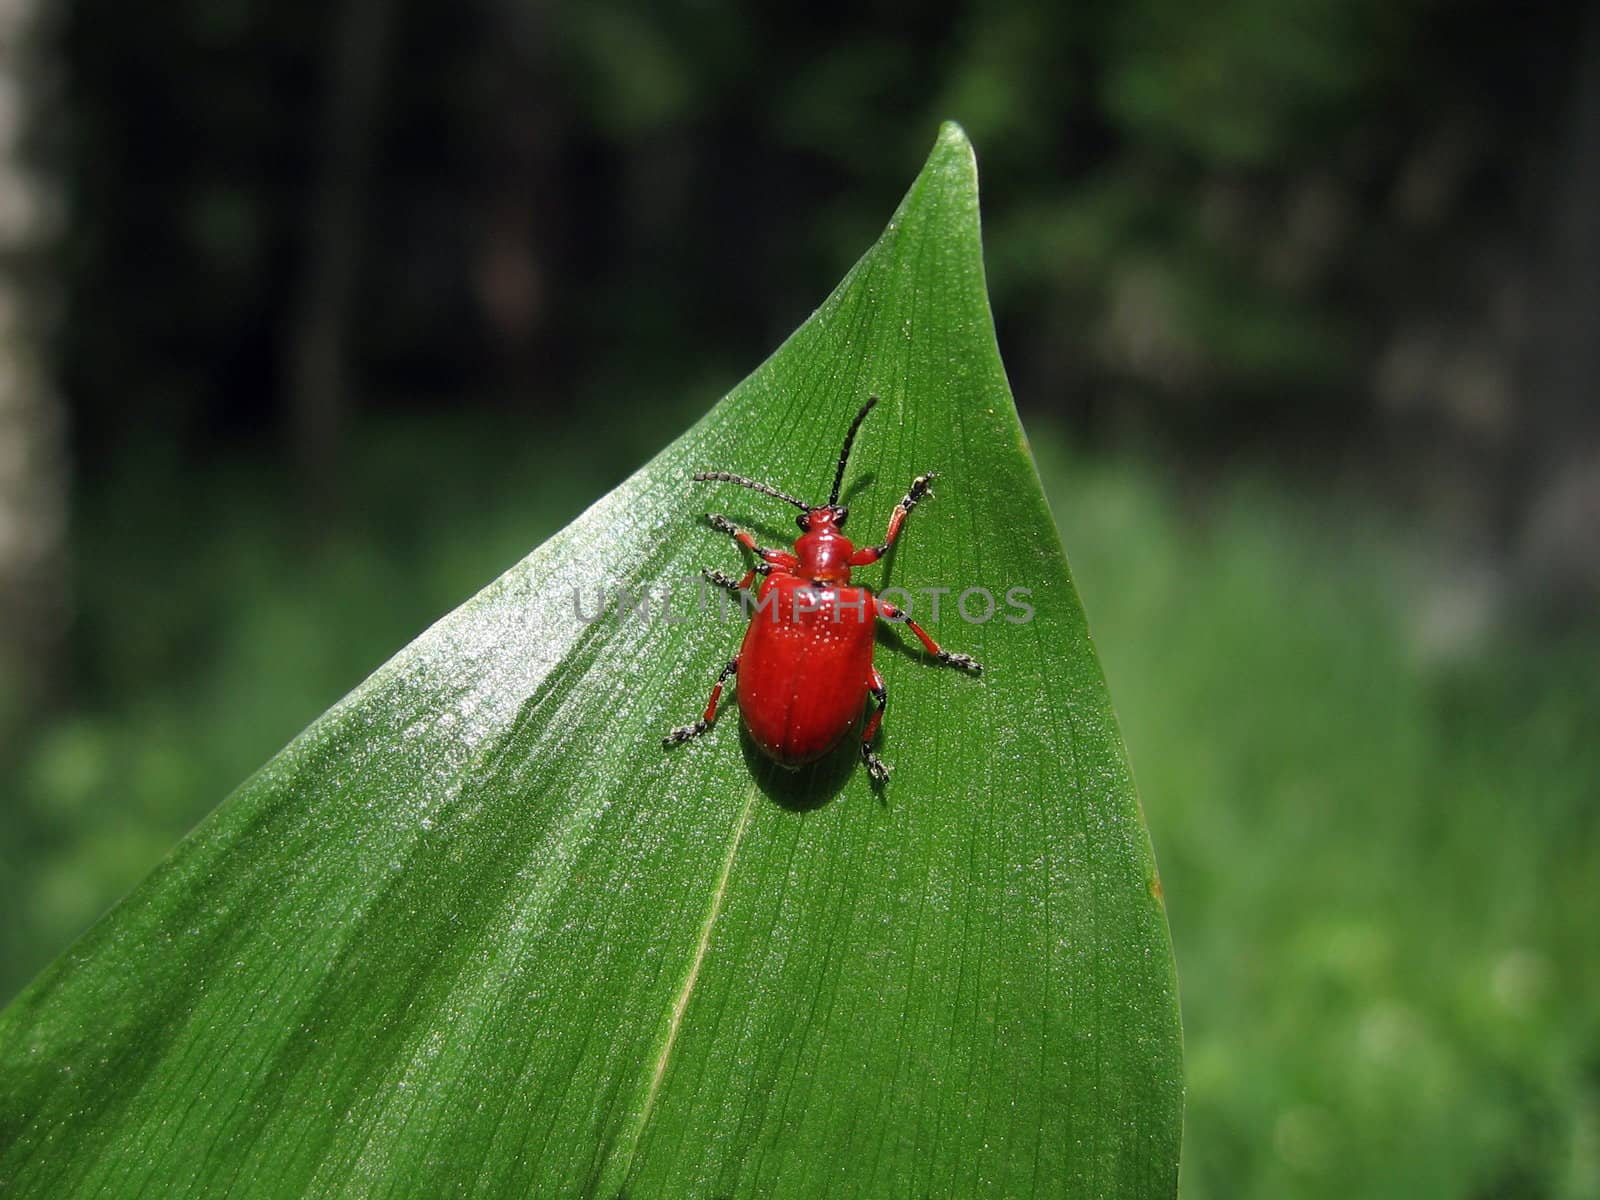 Small red bug on the green leaf